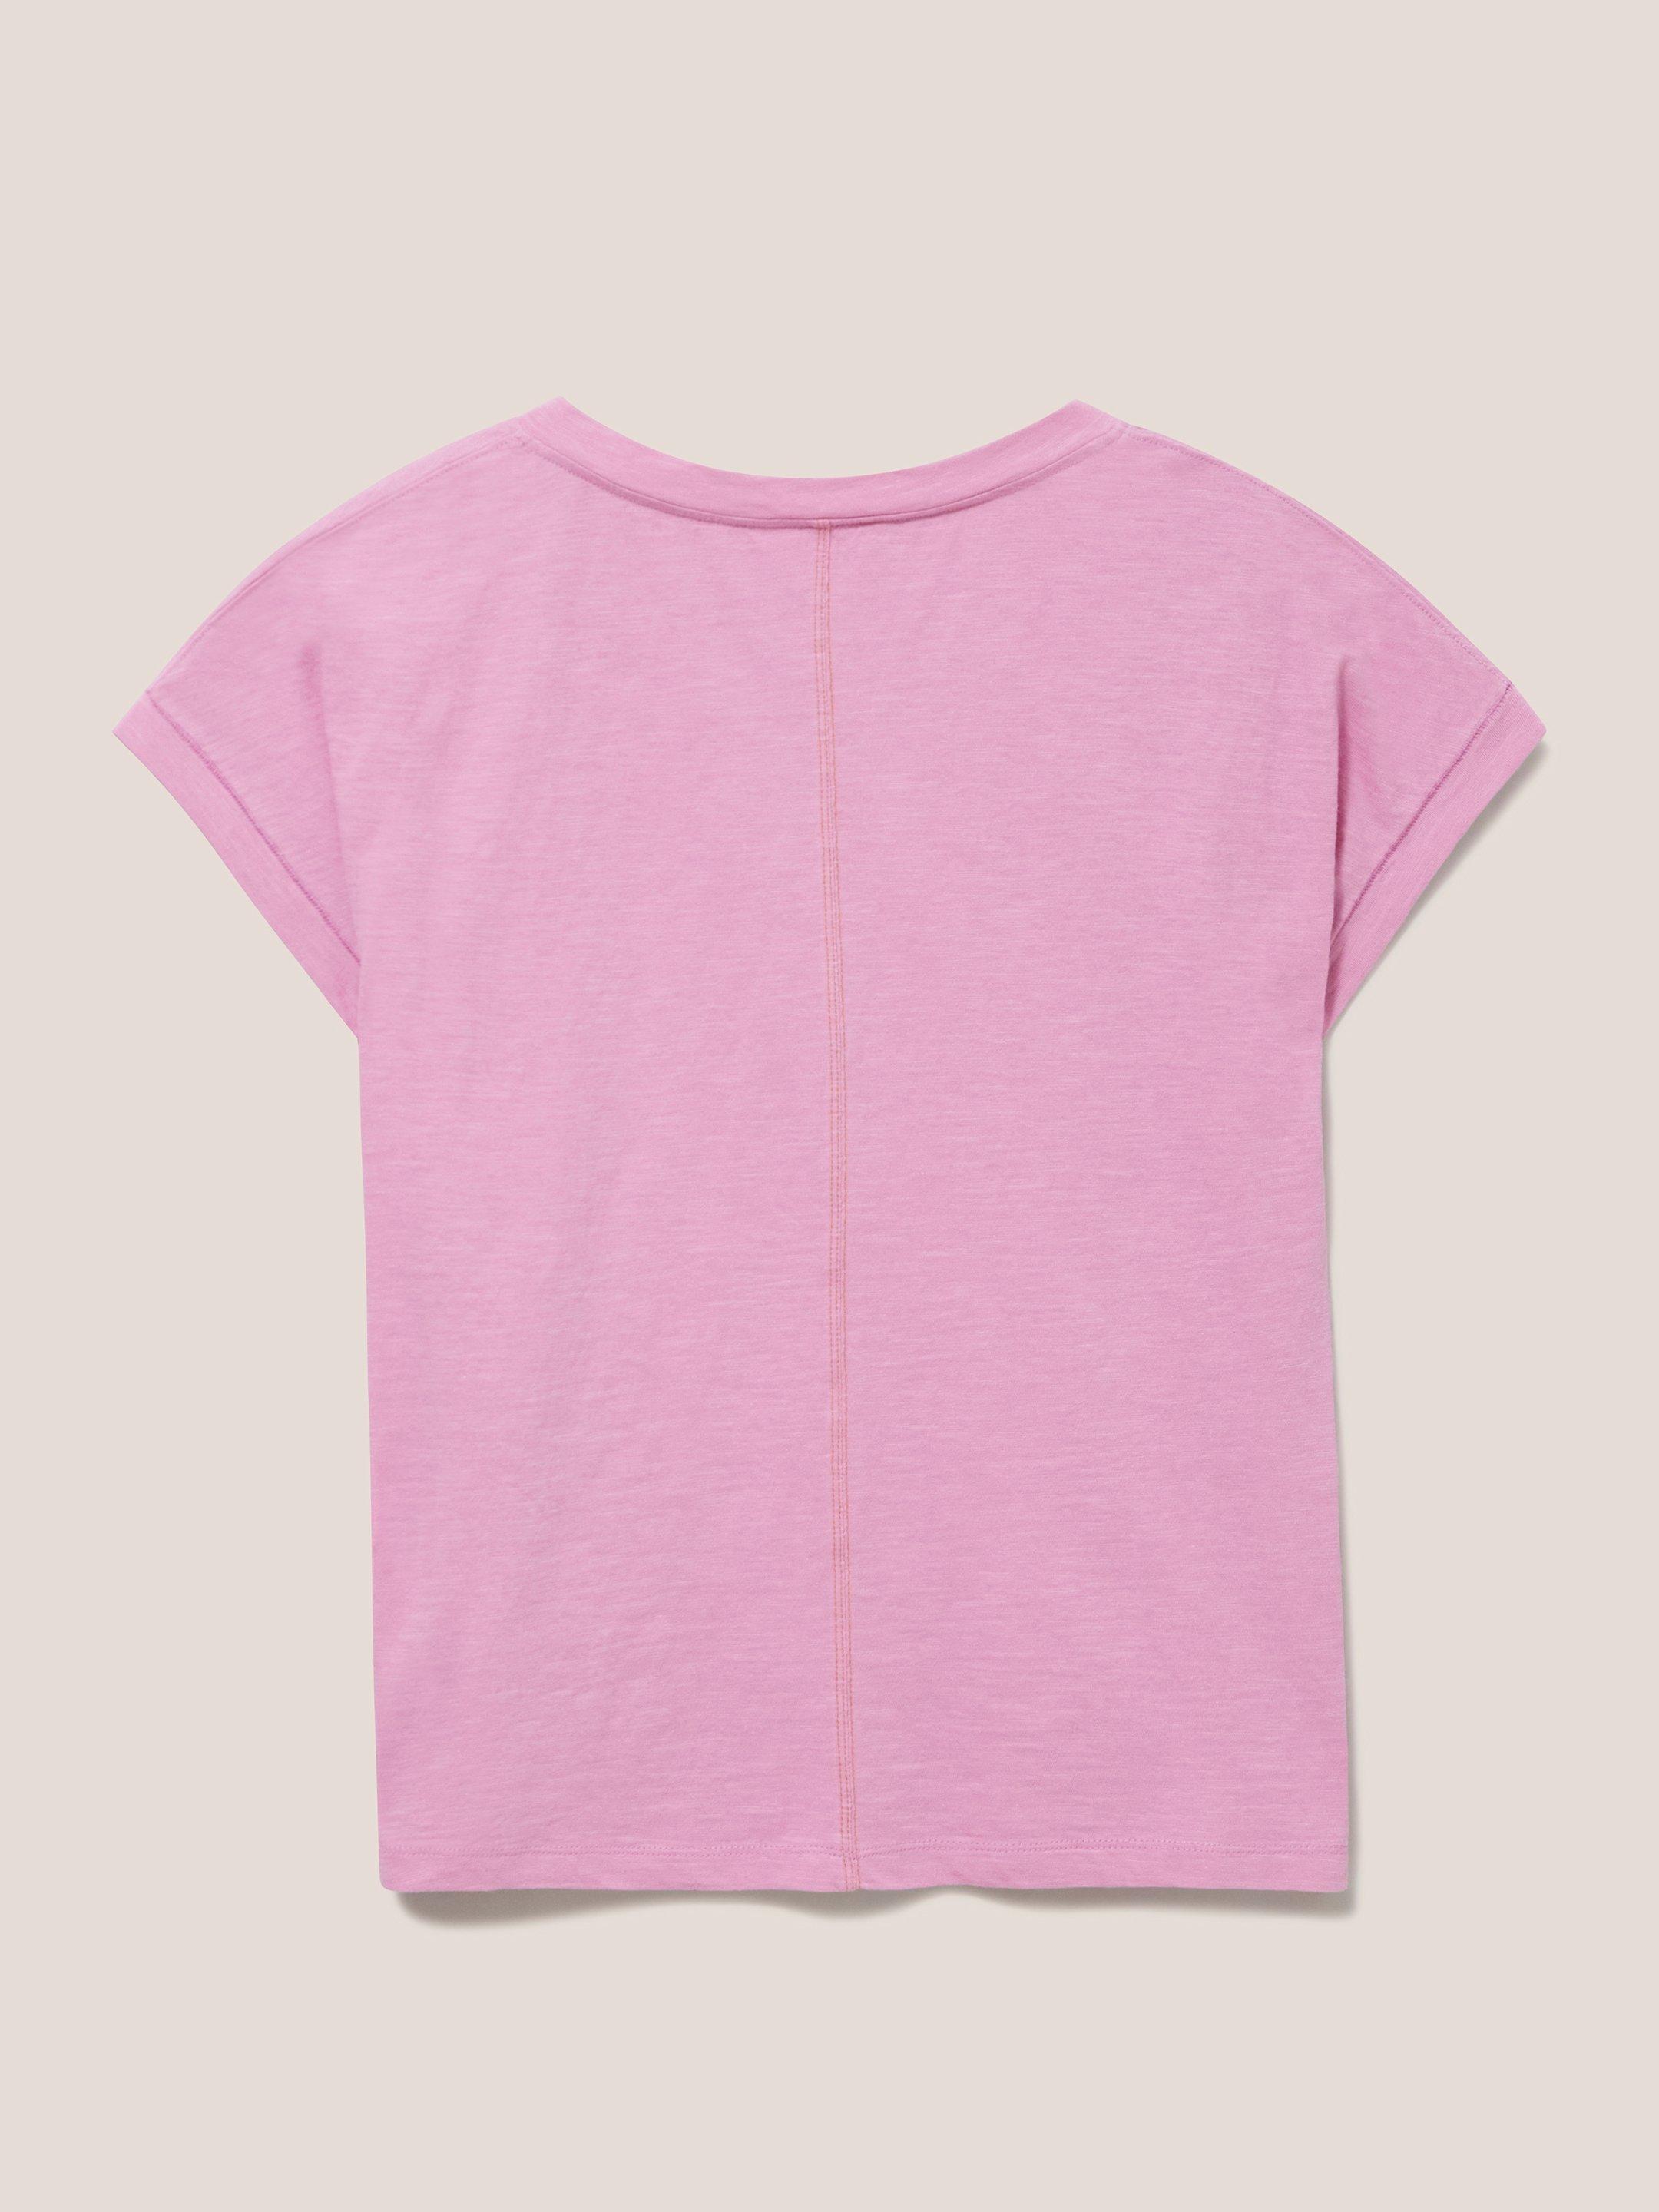 Nelly Organic Cotton Embroidered Tee in PINK MLT - FLAT BACK